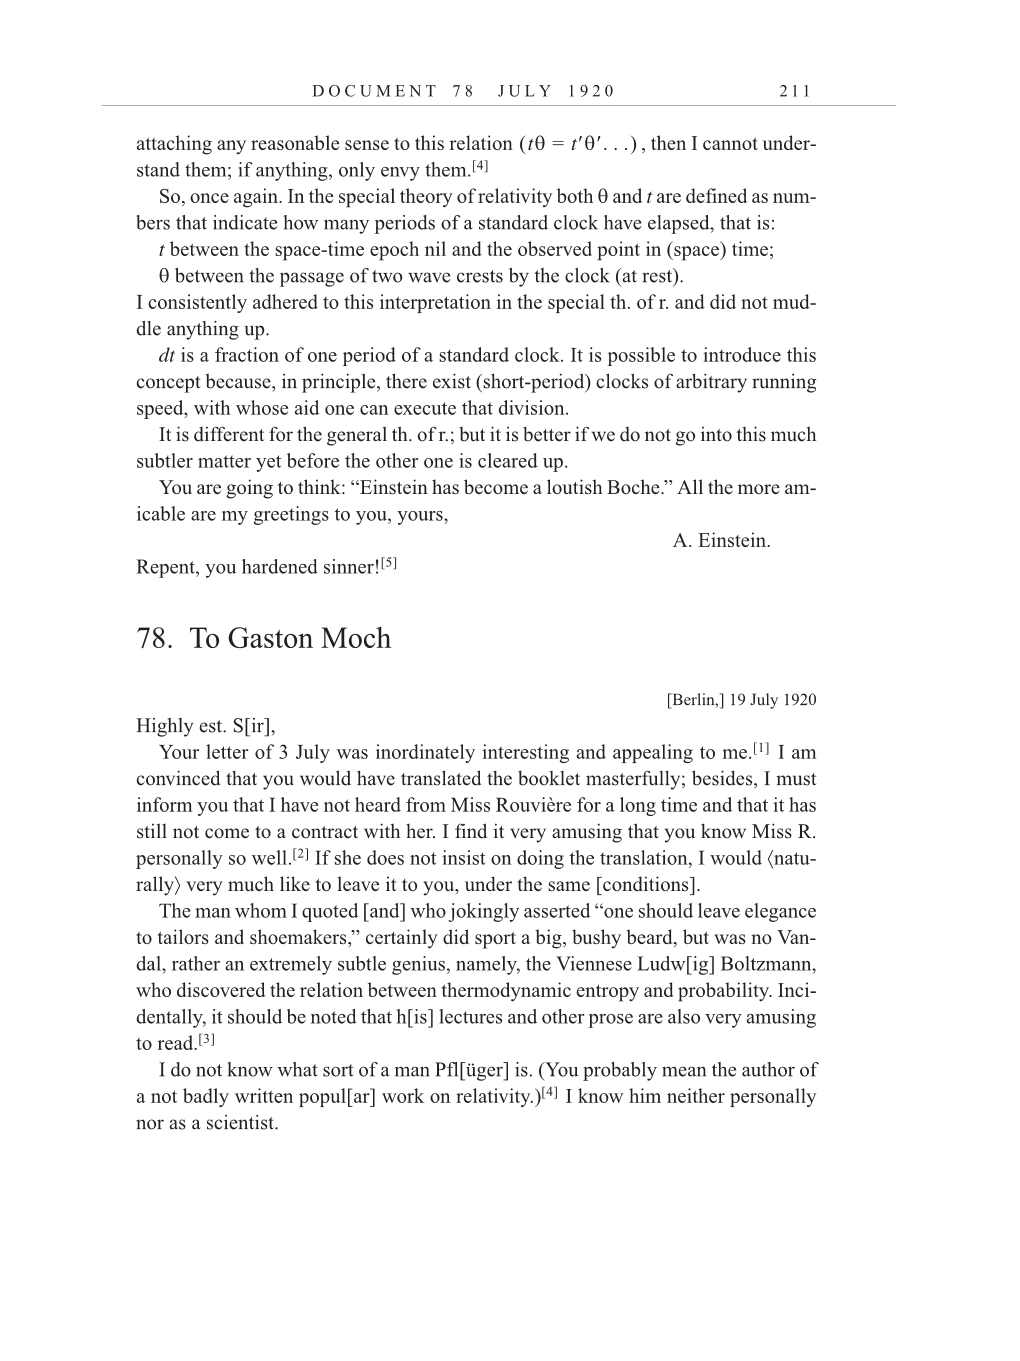 Volume 10: The Berlin Years: Correspondence, May-December 1920, and Supplementary Correspondence, 1909-1920 (English translation supplement) page 211